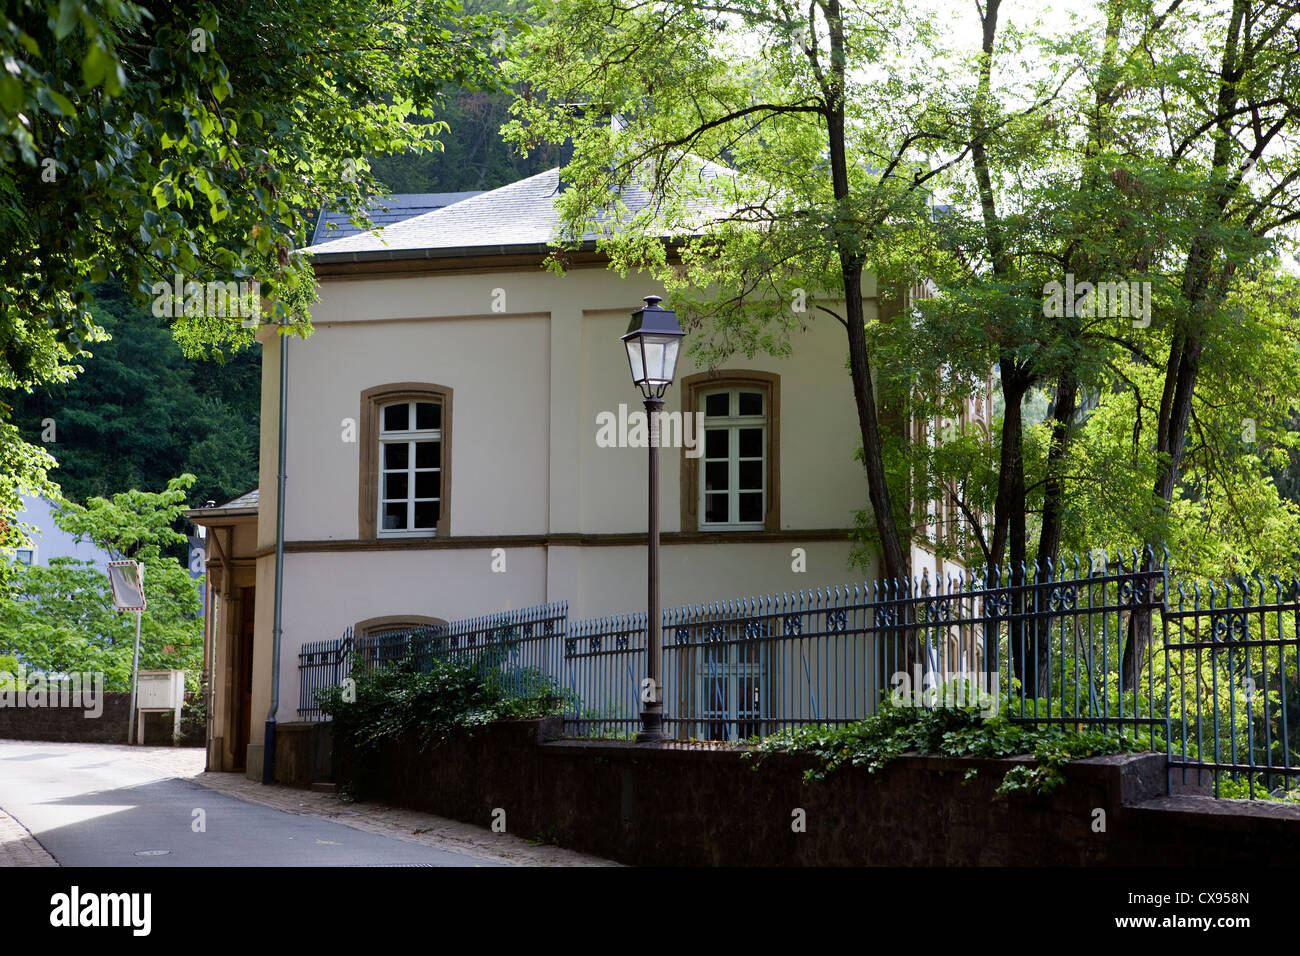 The birthplace of Jean-Baptiste Nicolas Robert Schuman, 1886 - 1963, a german-french statesman, Luxembourg Claussen, Europe Stock Photo